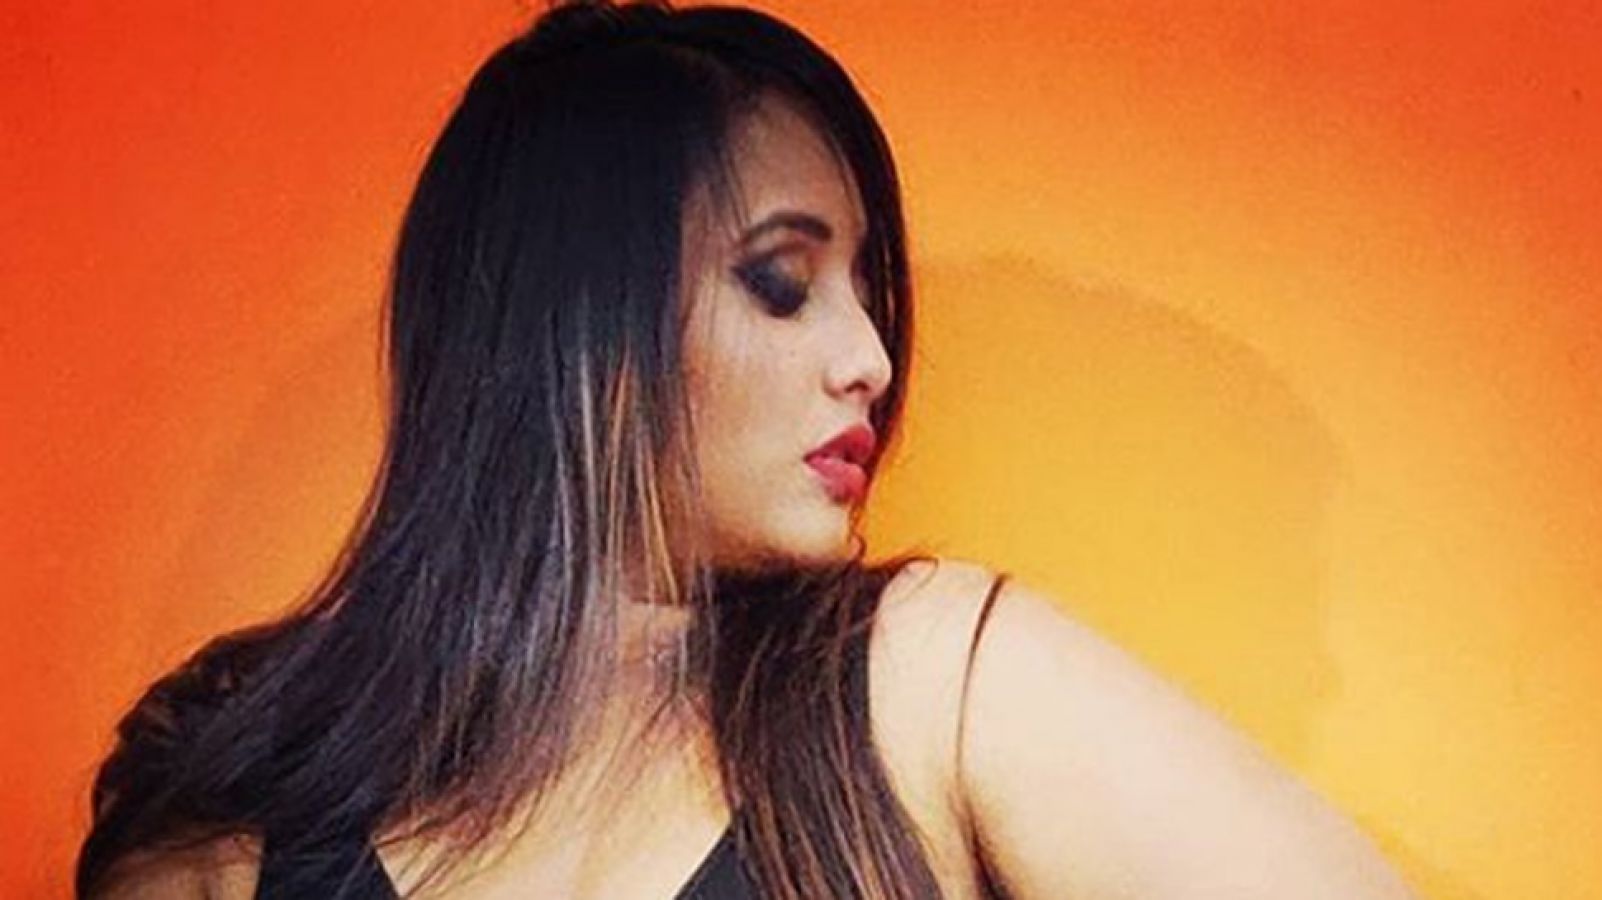 Rani Chatterjee Sex - Rani Chatterjee spotted in hot dress, fans go crazy | News Track ...